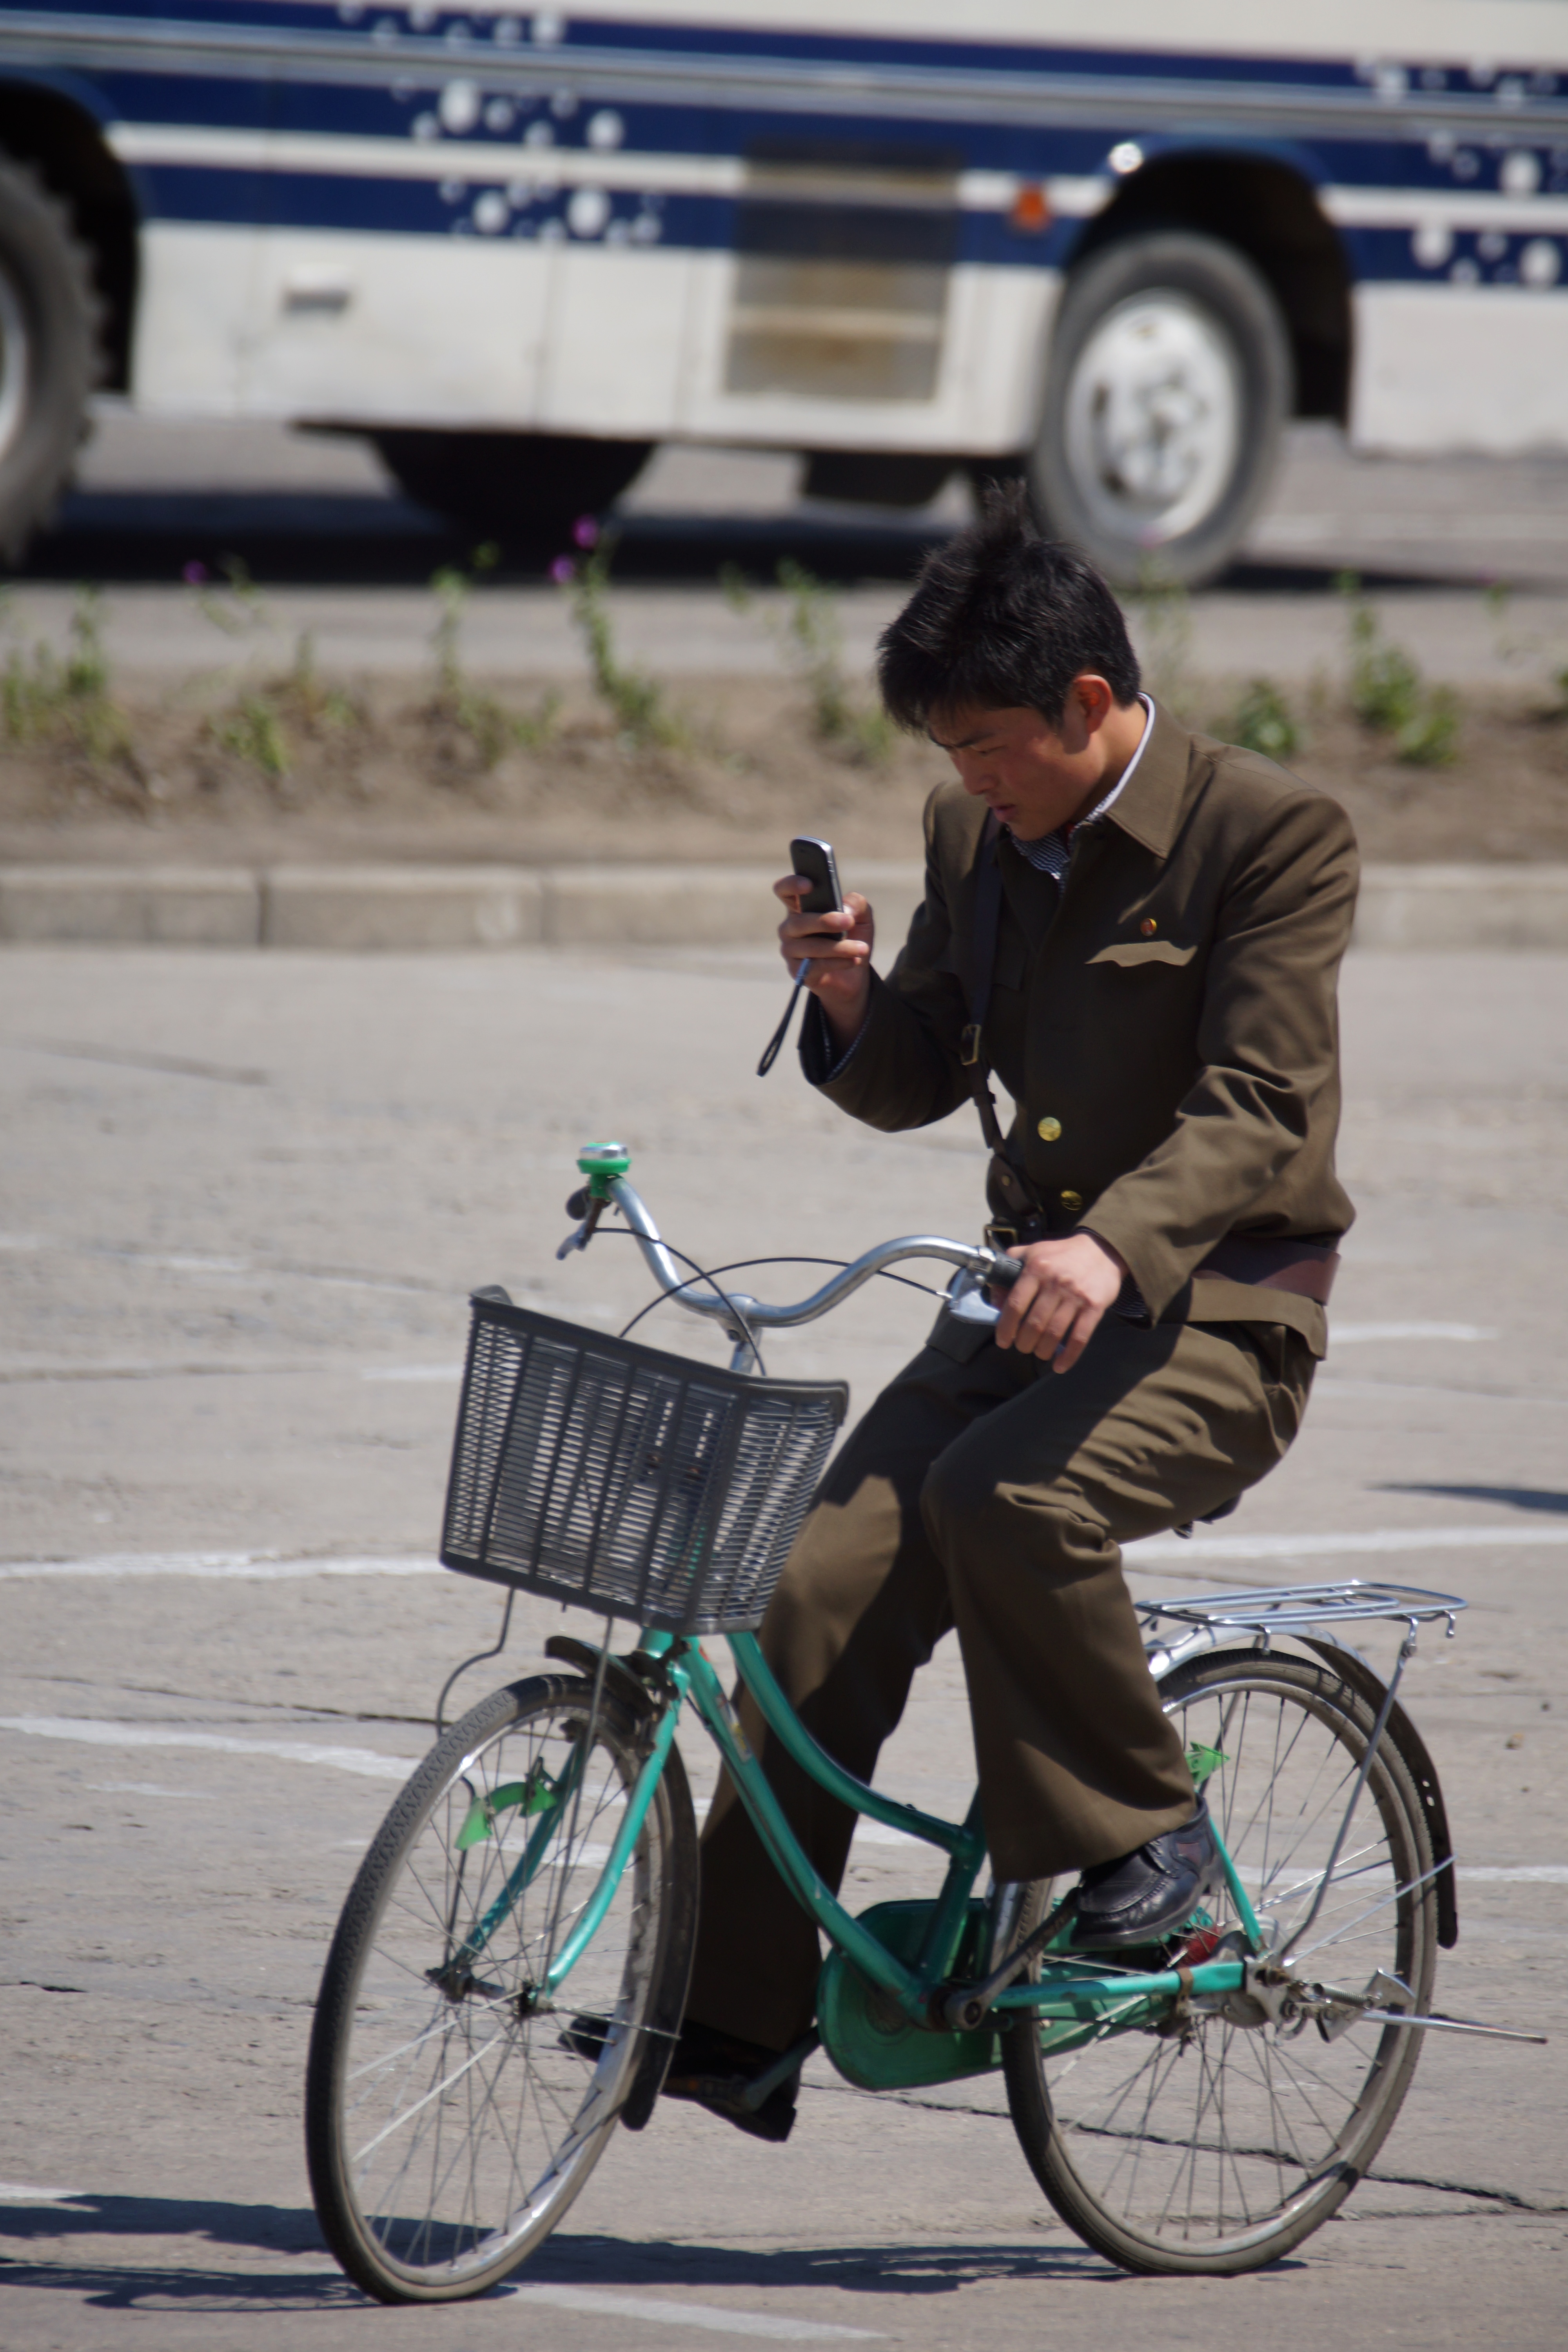 Cyclist on mobile phone